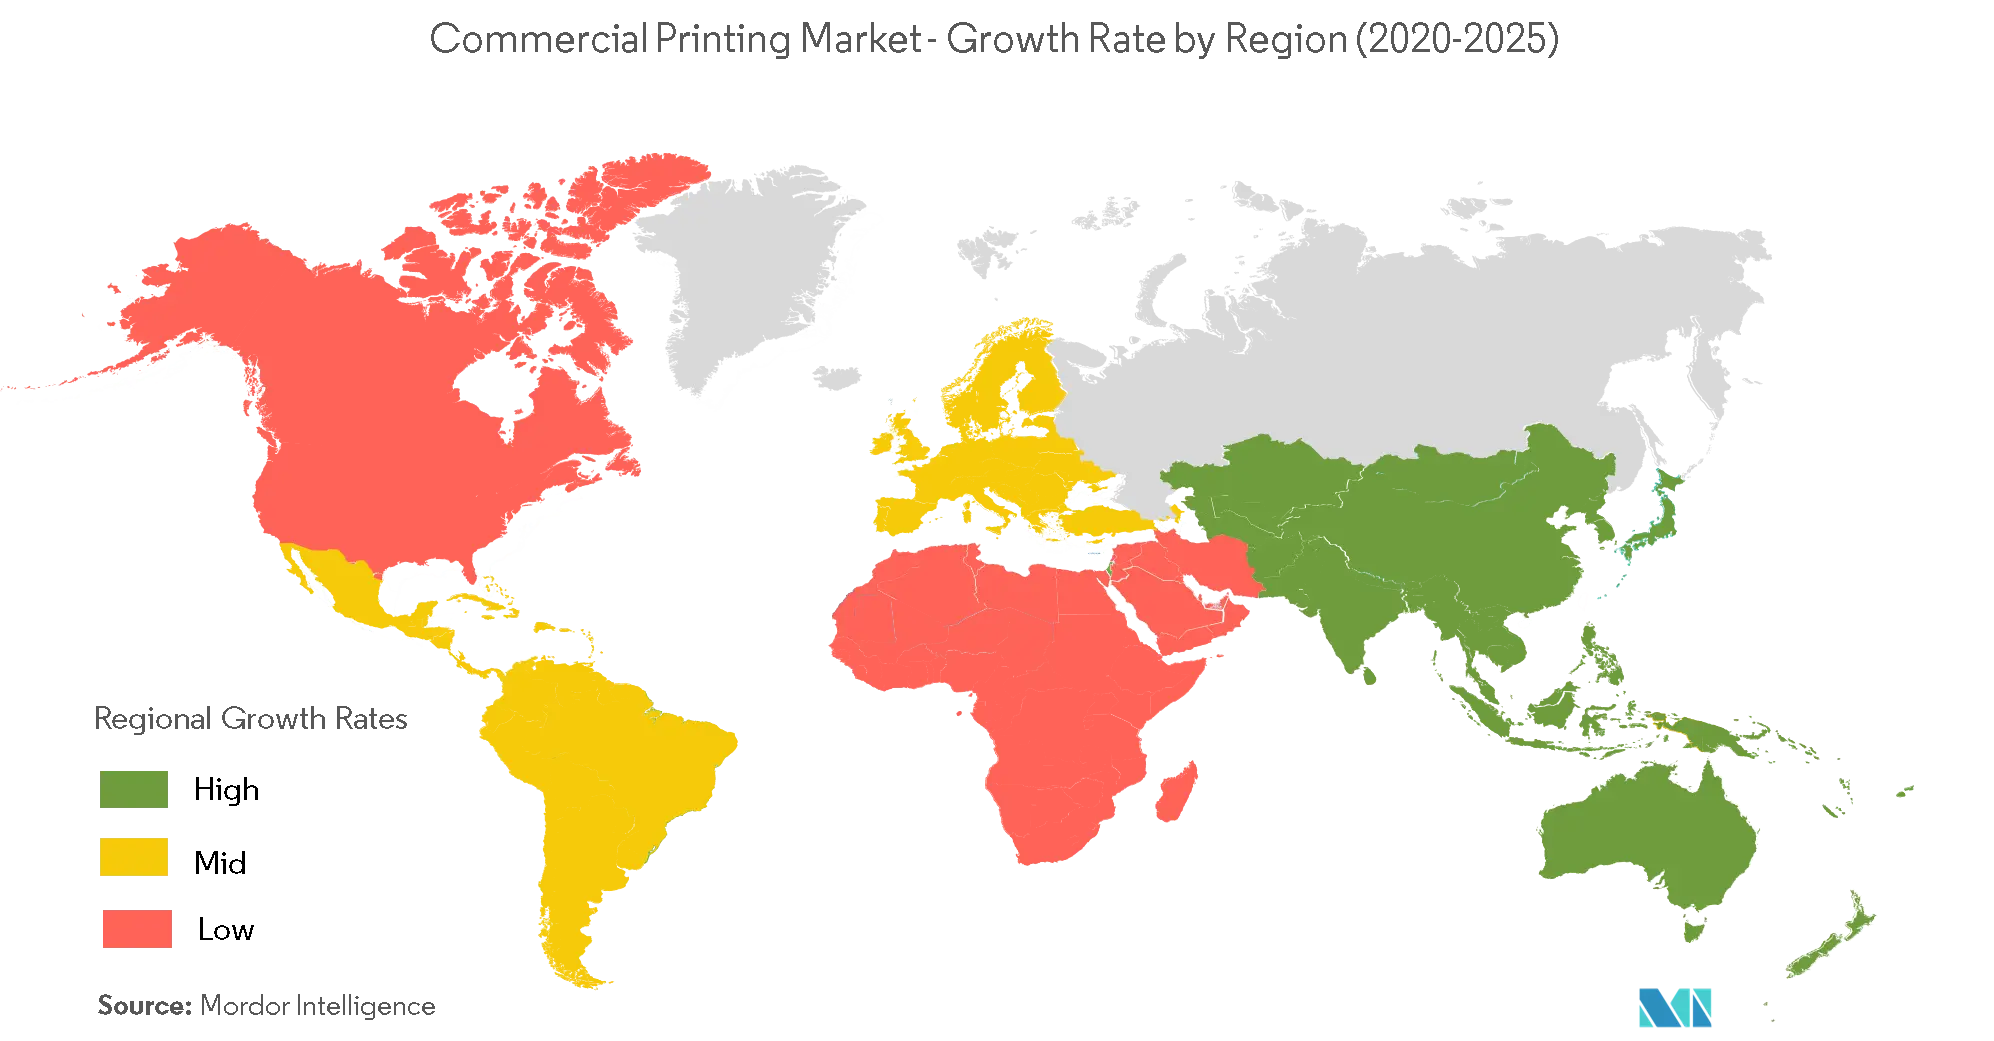 Commercial Printing Market Growth Rate